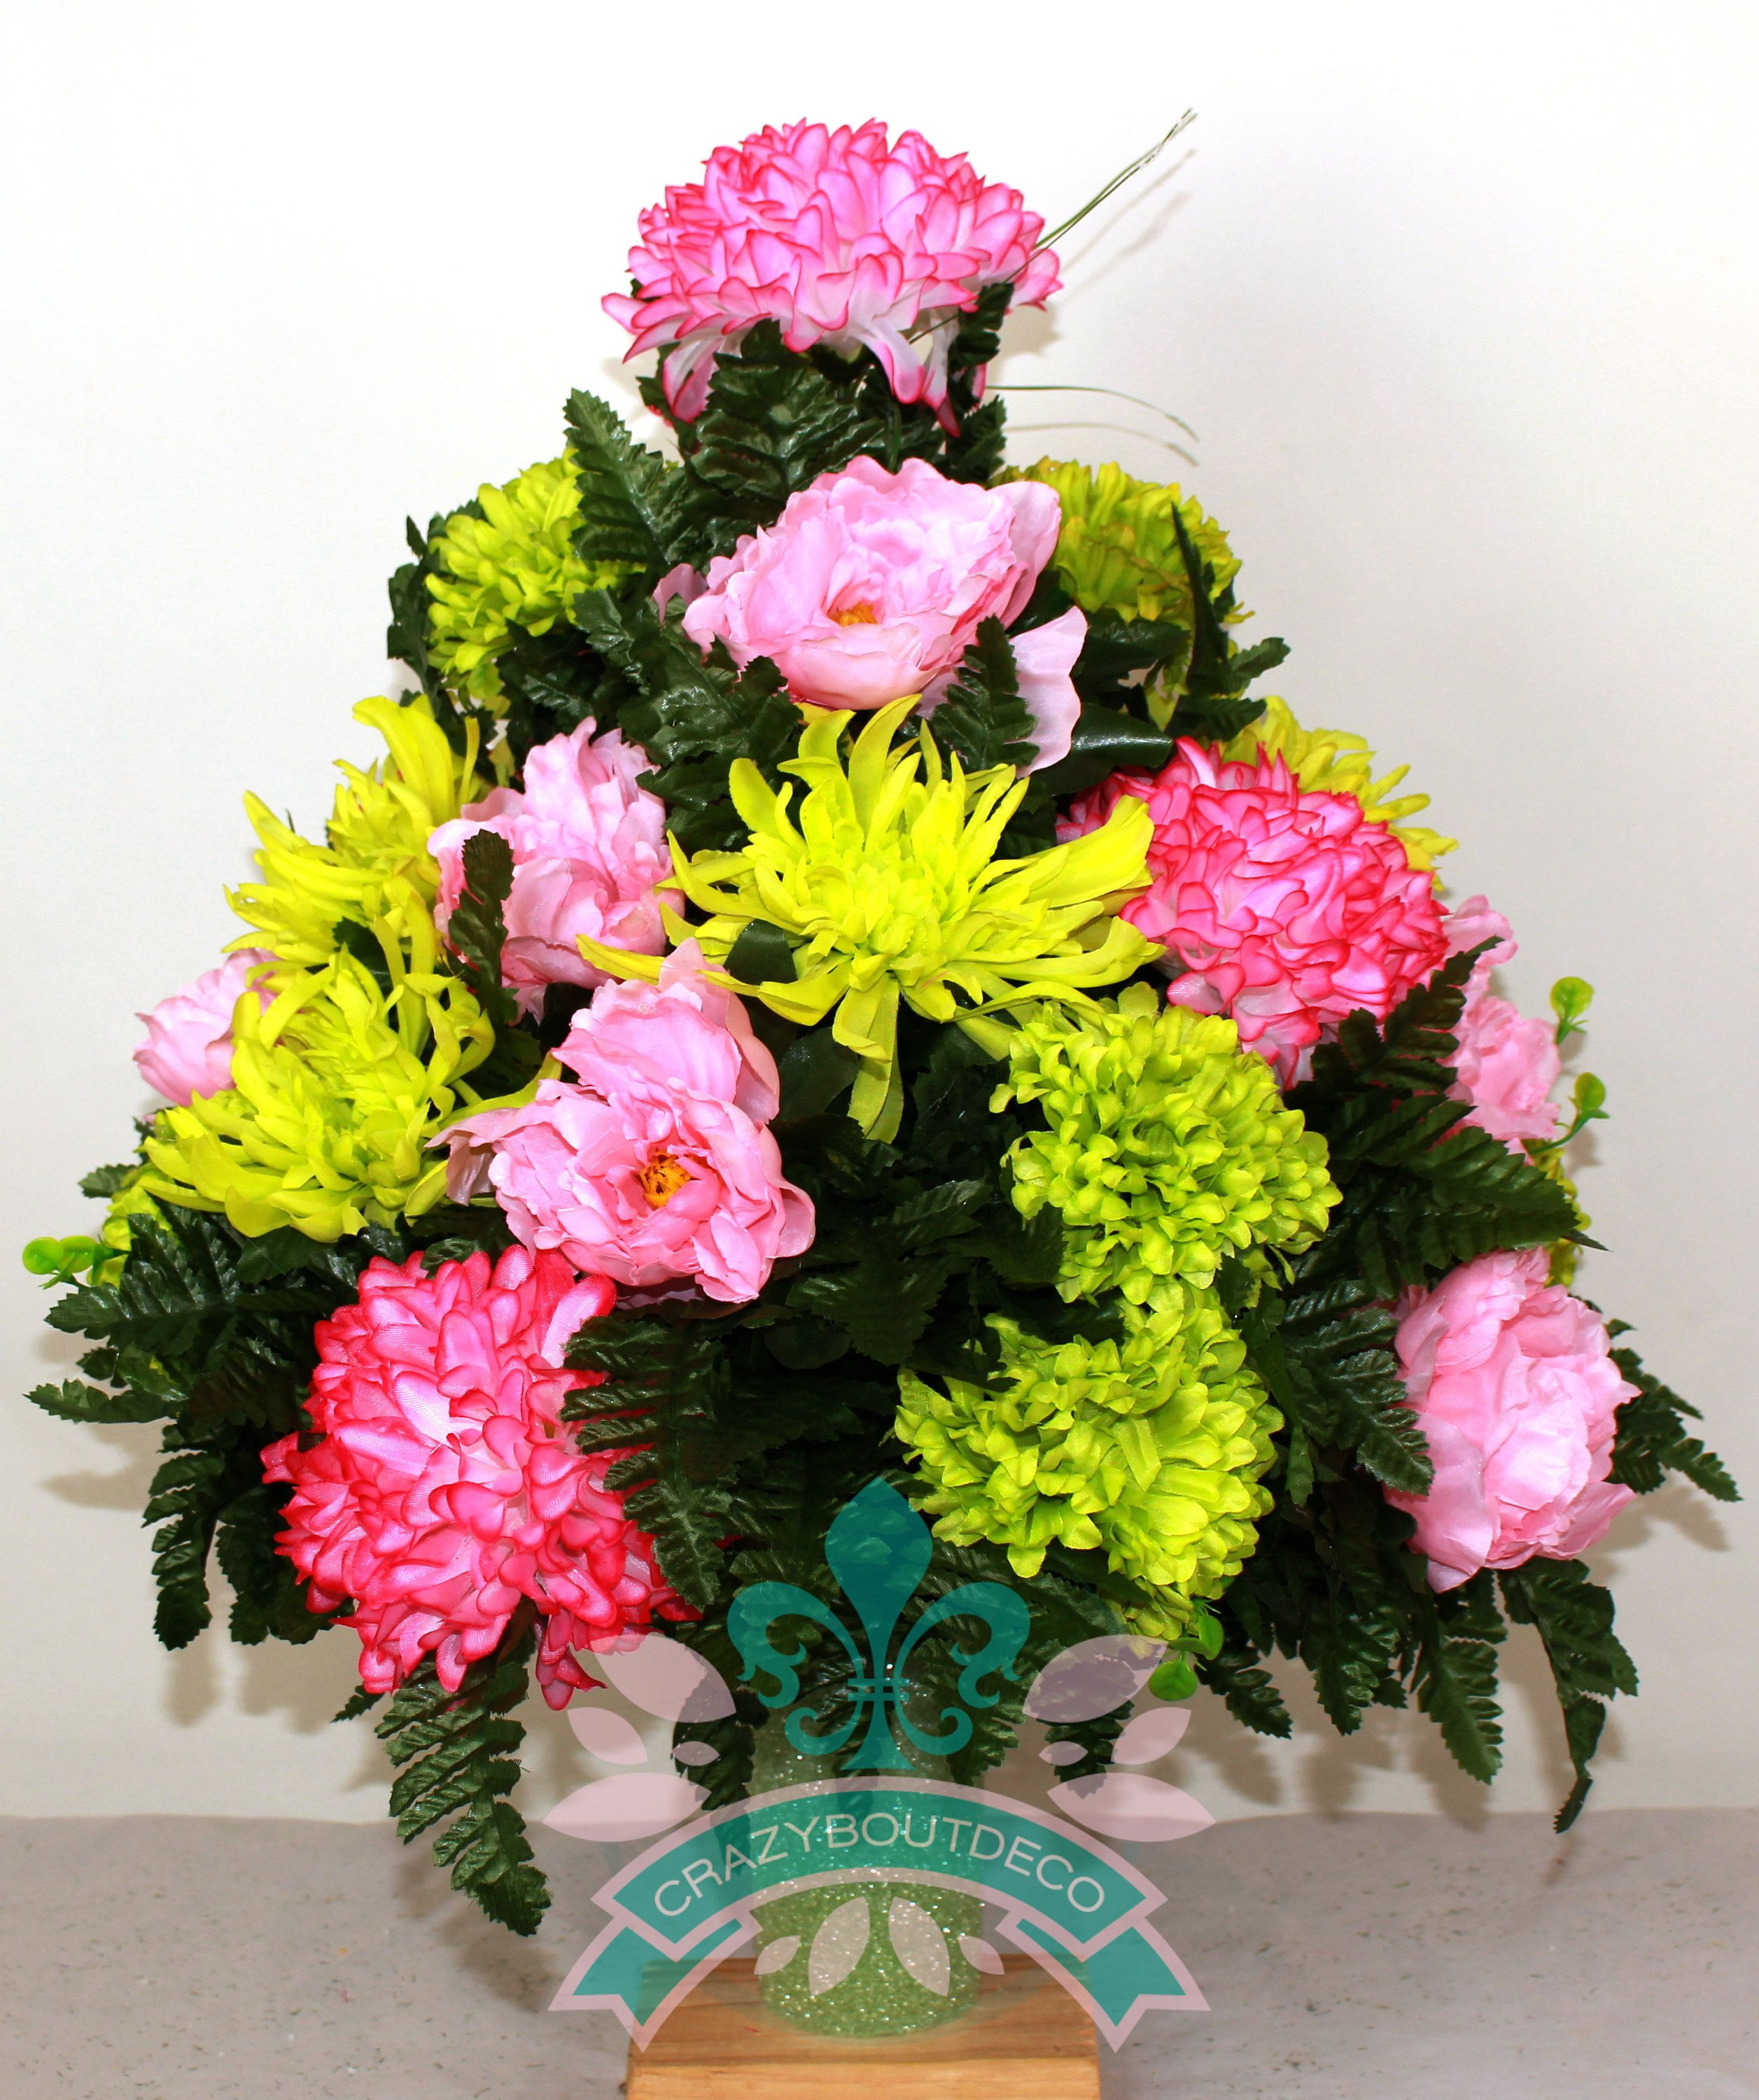 12 attractive Cemetery Flower Vases wholesale 2024 free download cemetery flower vases wholesale of beautiful xl spring mixture cemetery vase arrangement for 3 inch vase intended for a5205c6bbd090a23bbad3ce80dca137c